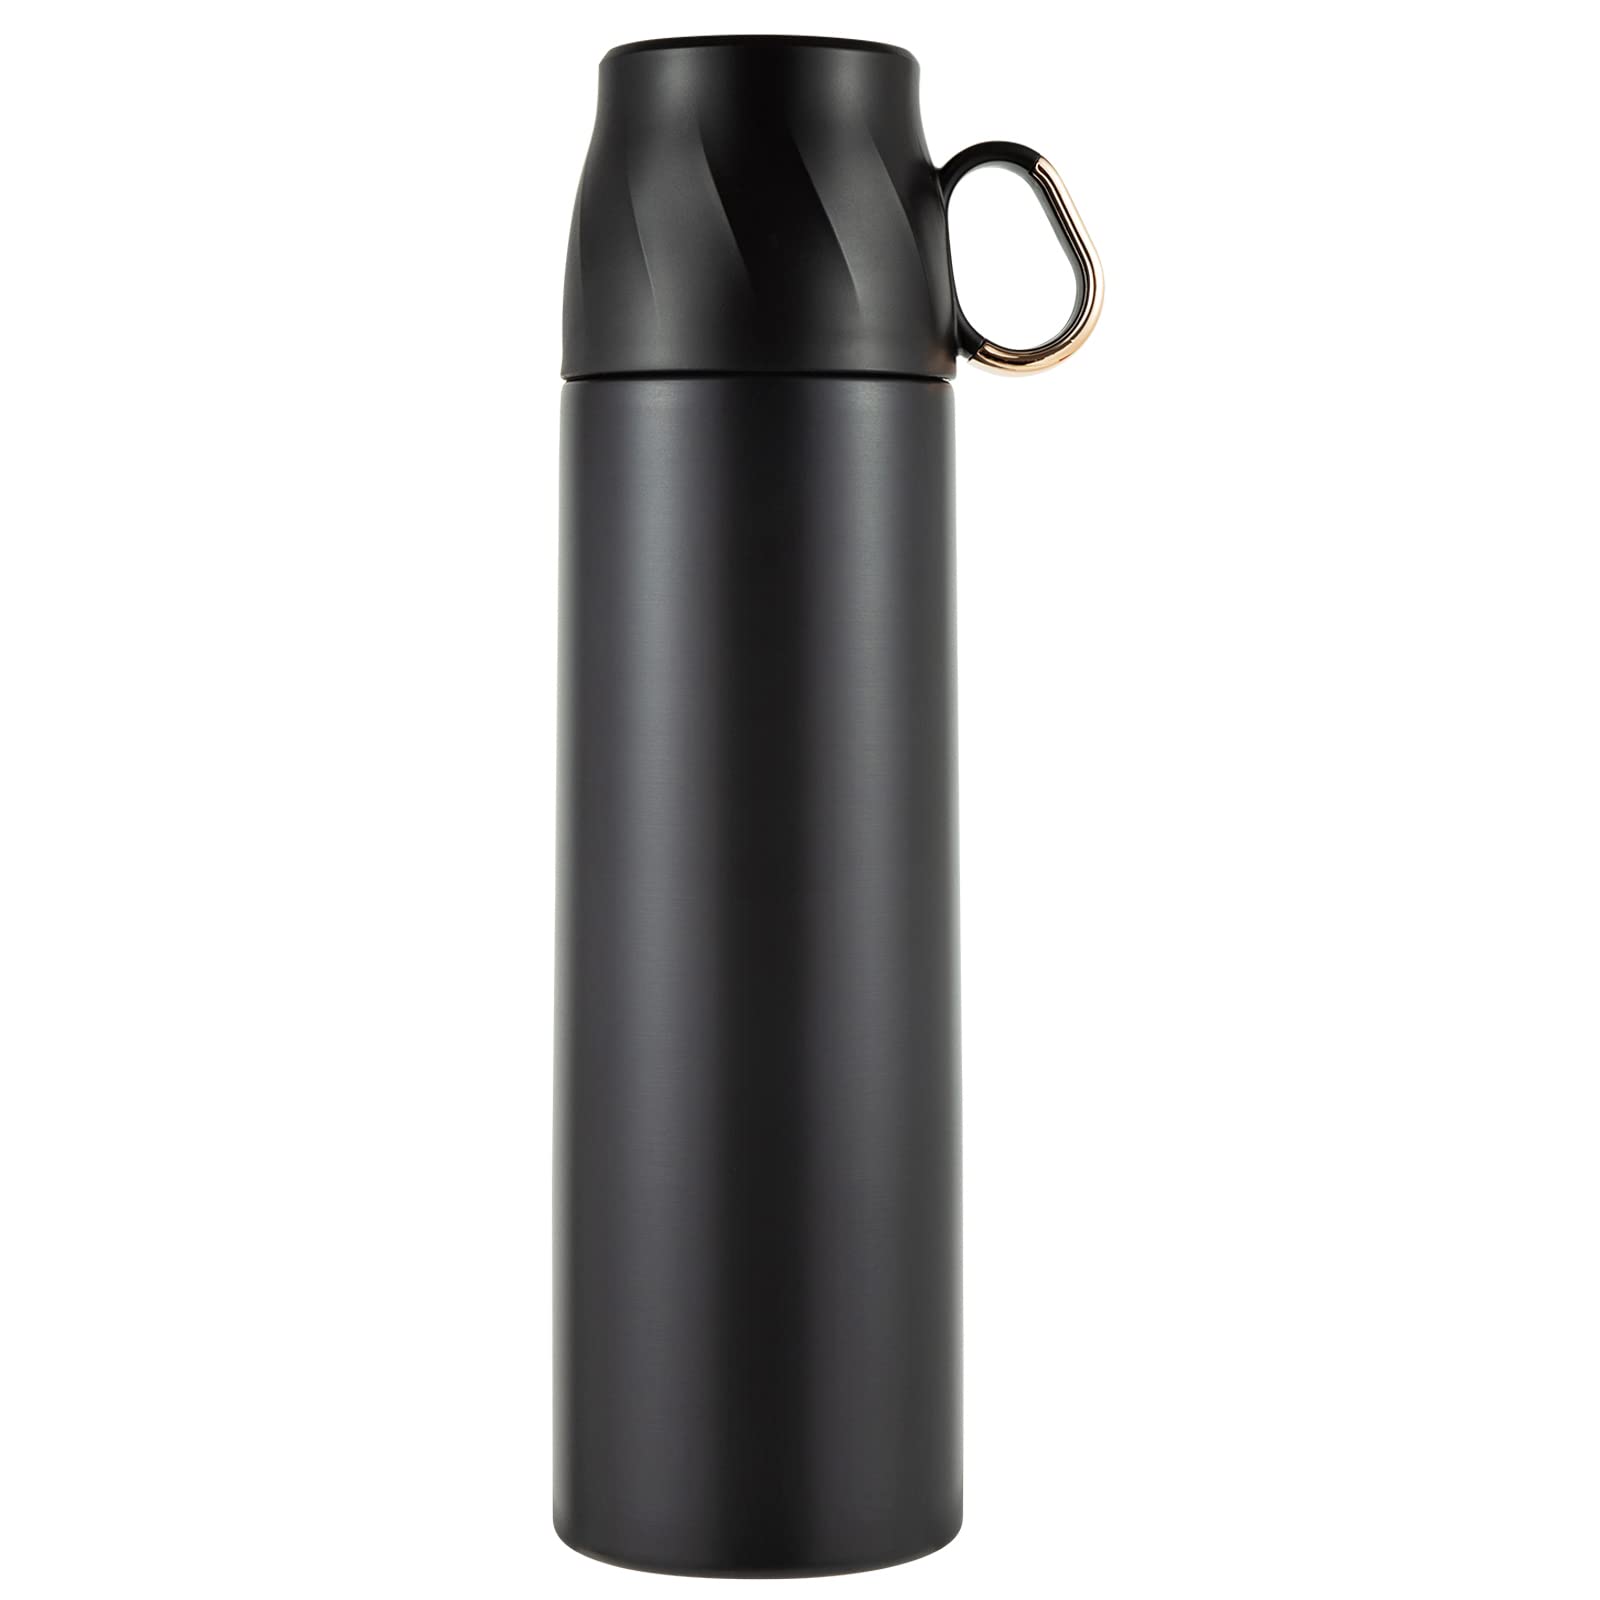 Sonncson Stainless Steel Insulated Water Bottle